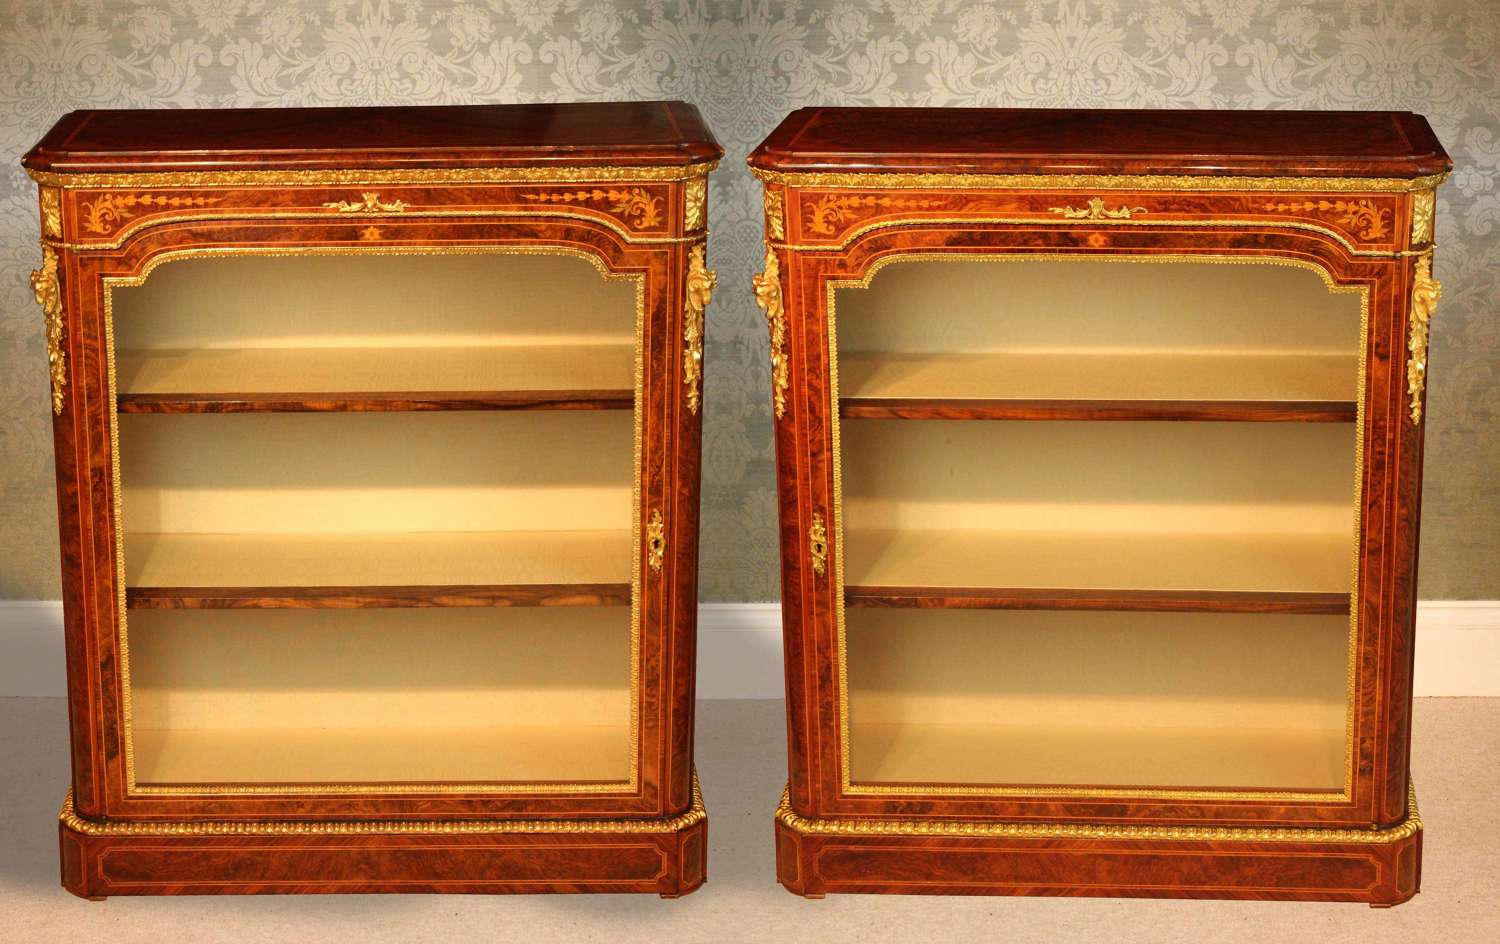 A Pair Victorian Burr Walnut inlaid Pier Cabinets by Wilkinson & Sons.